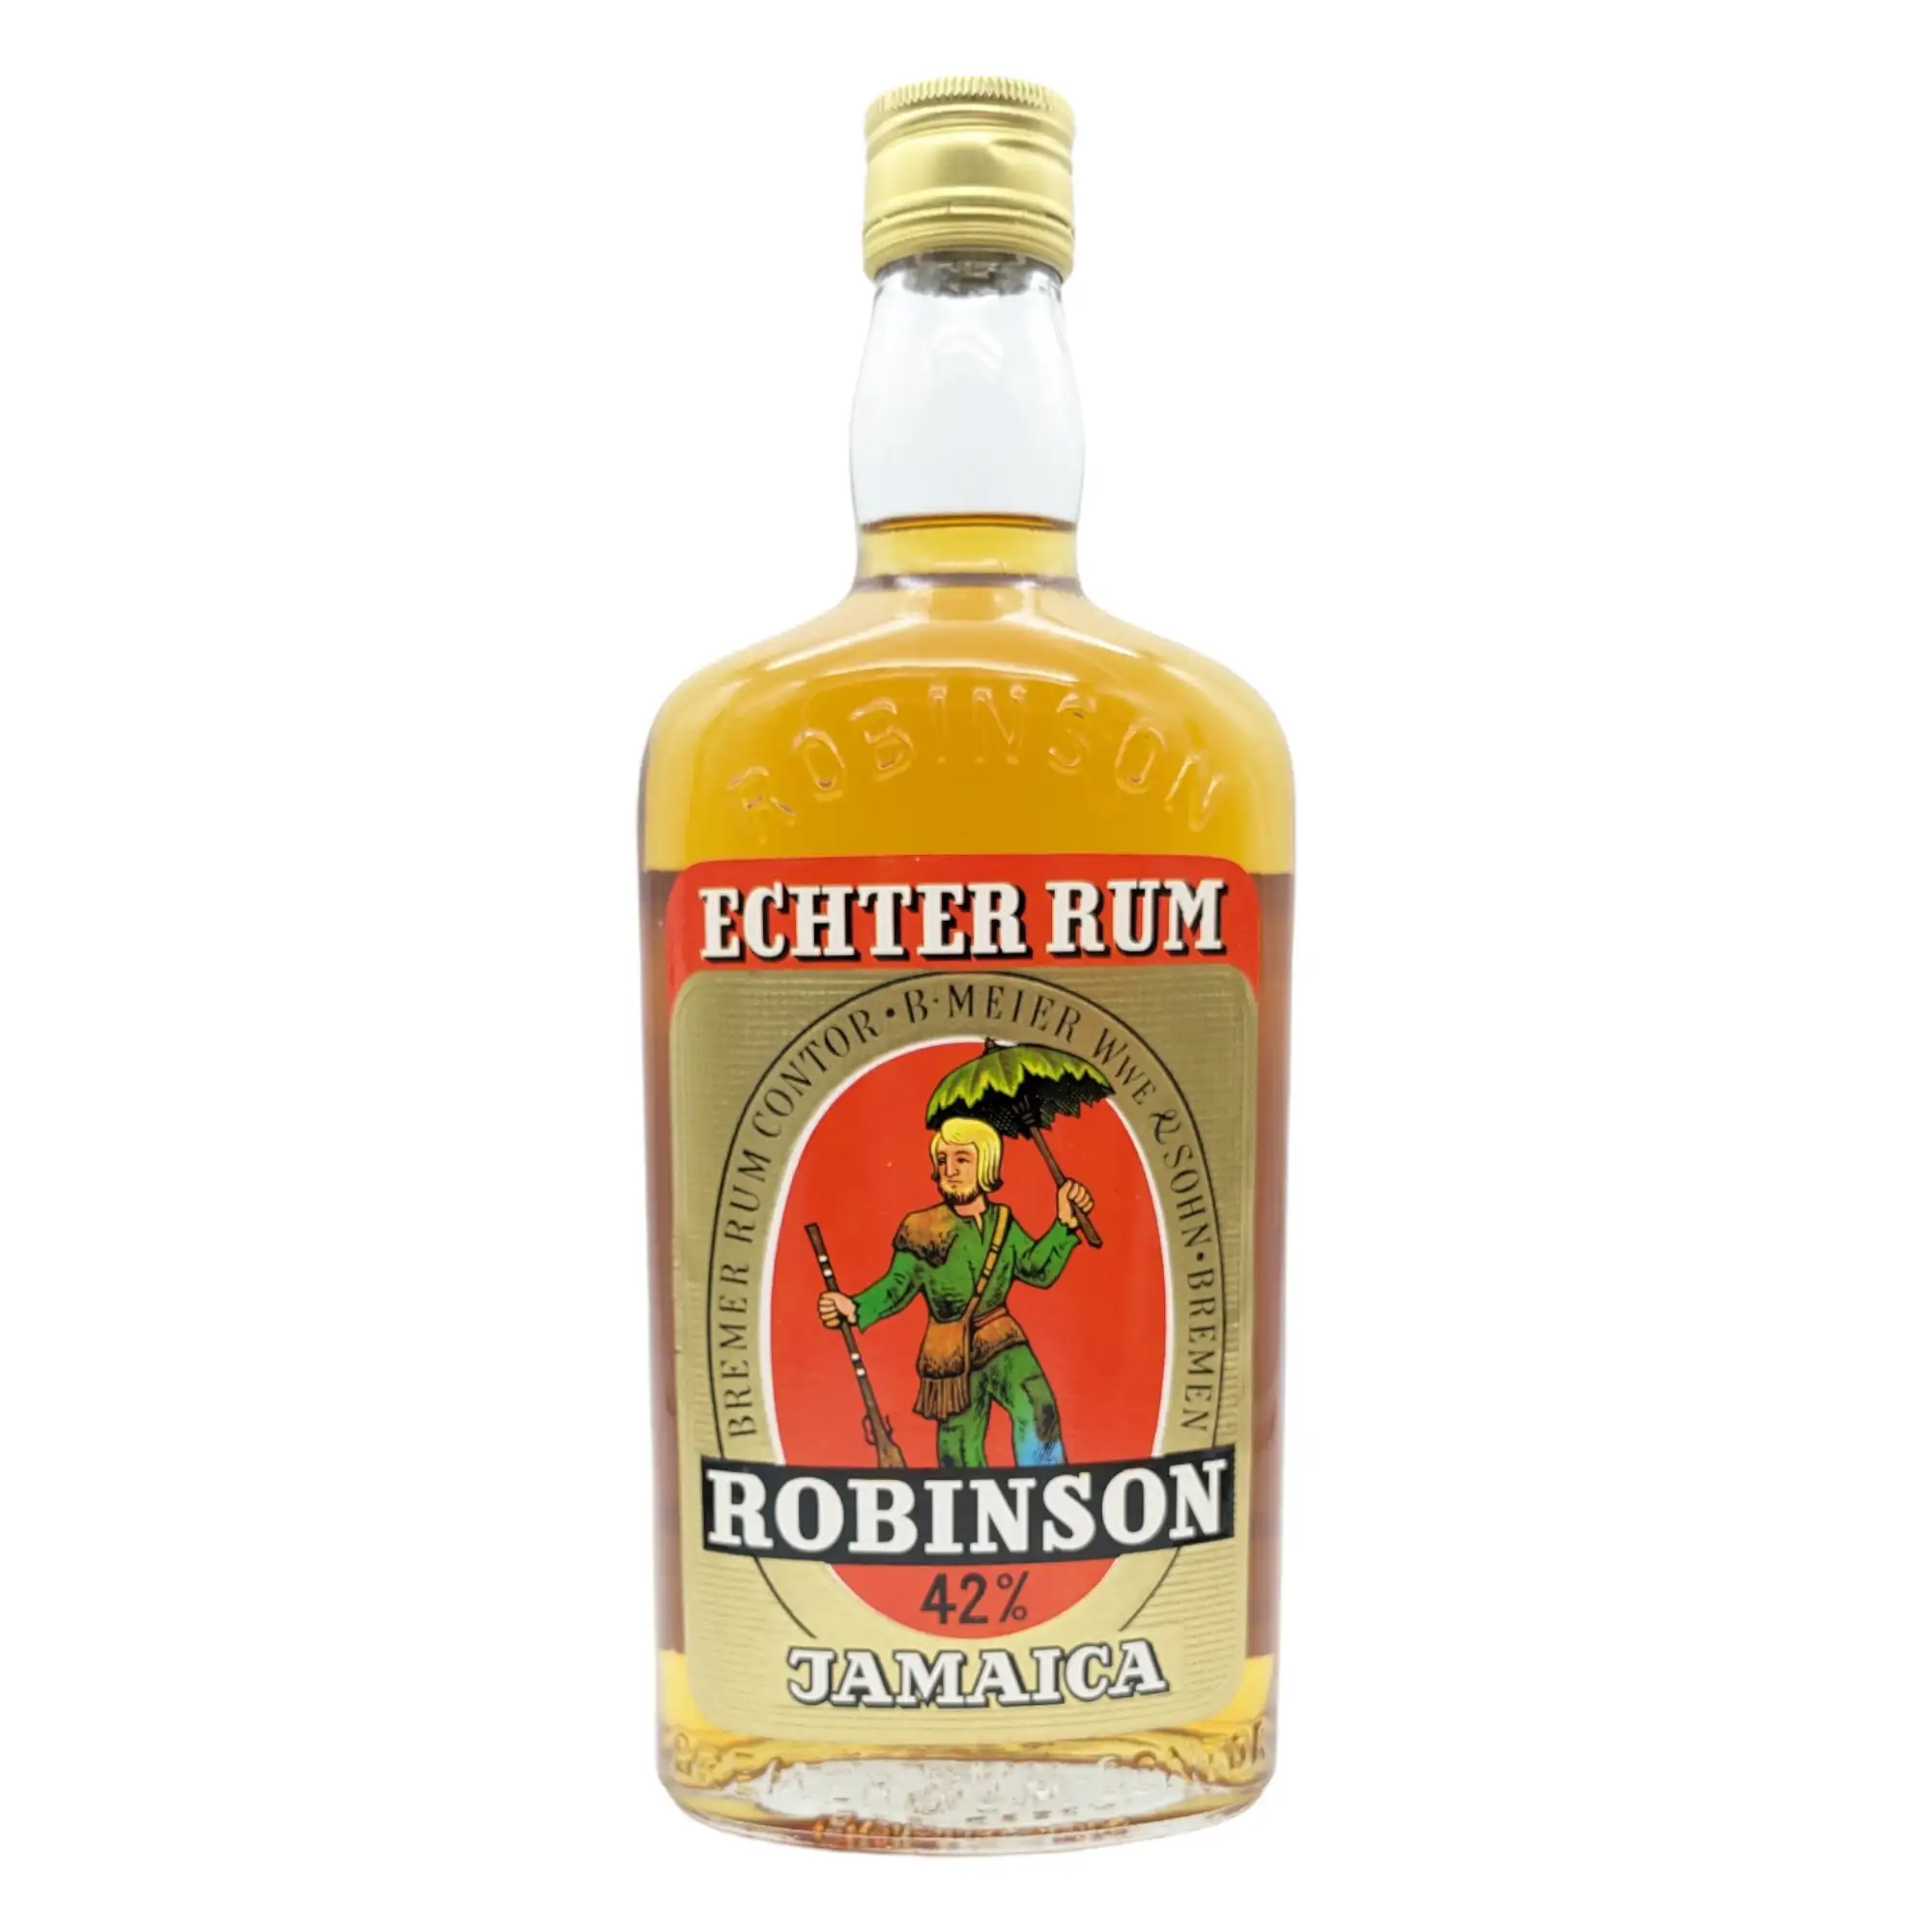 Image of the front of the bottle of the rum Robinson Echter Rum Jamaica